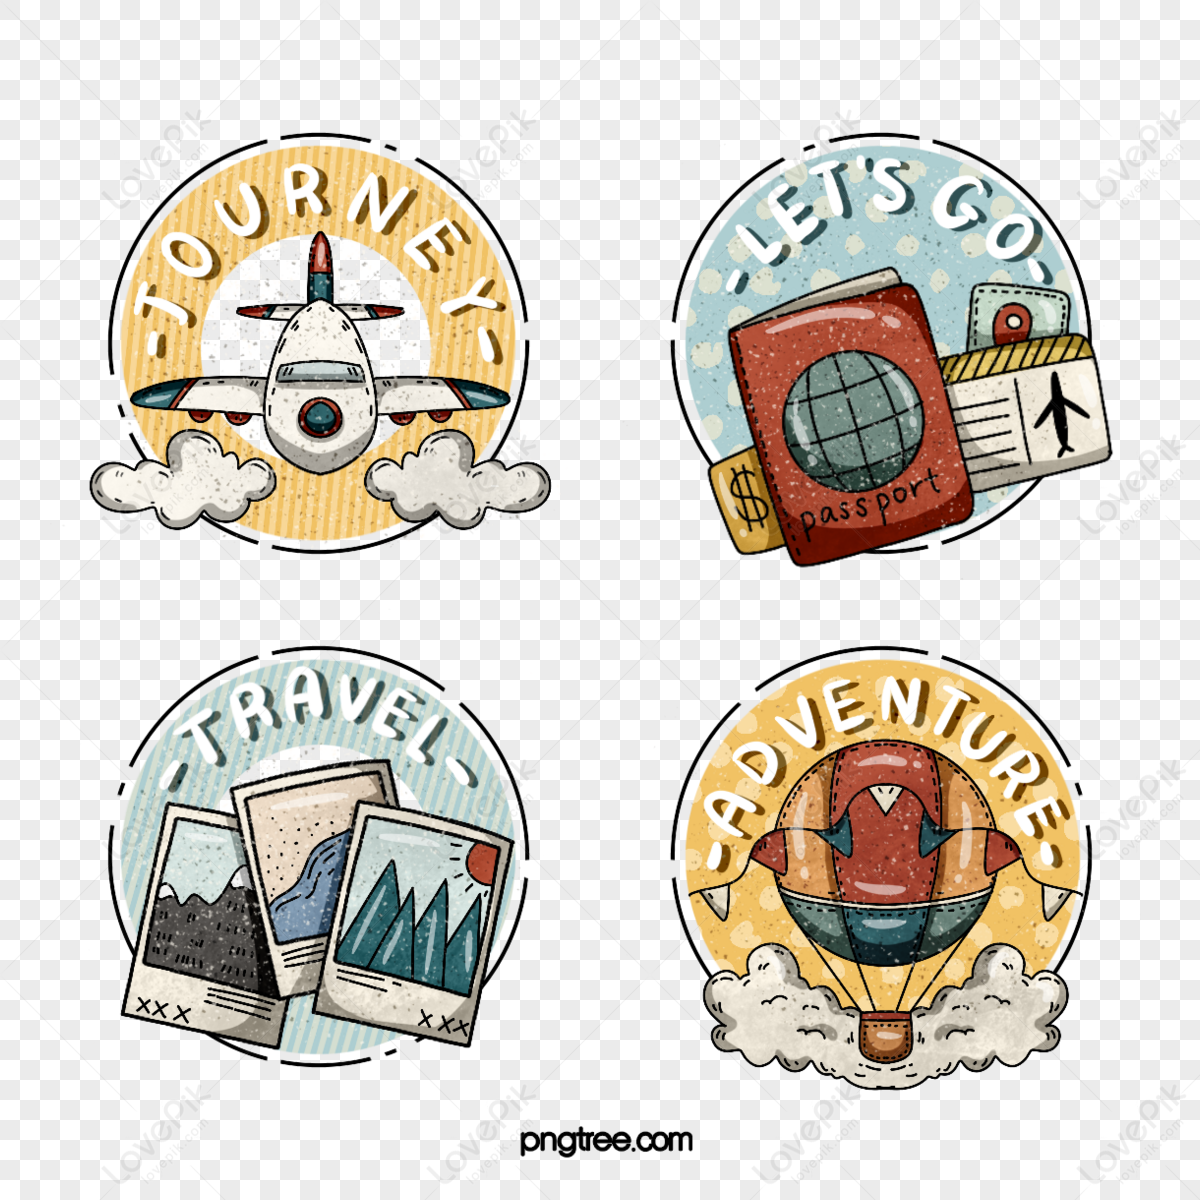 Cute cartoon style travel theme stickers,hot-air balloons,travel around the world png hd transparent image